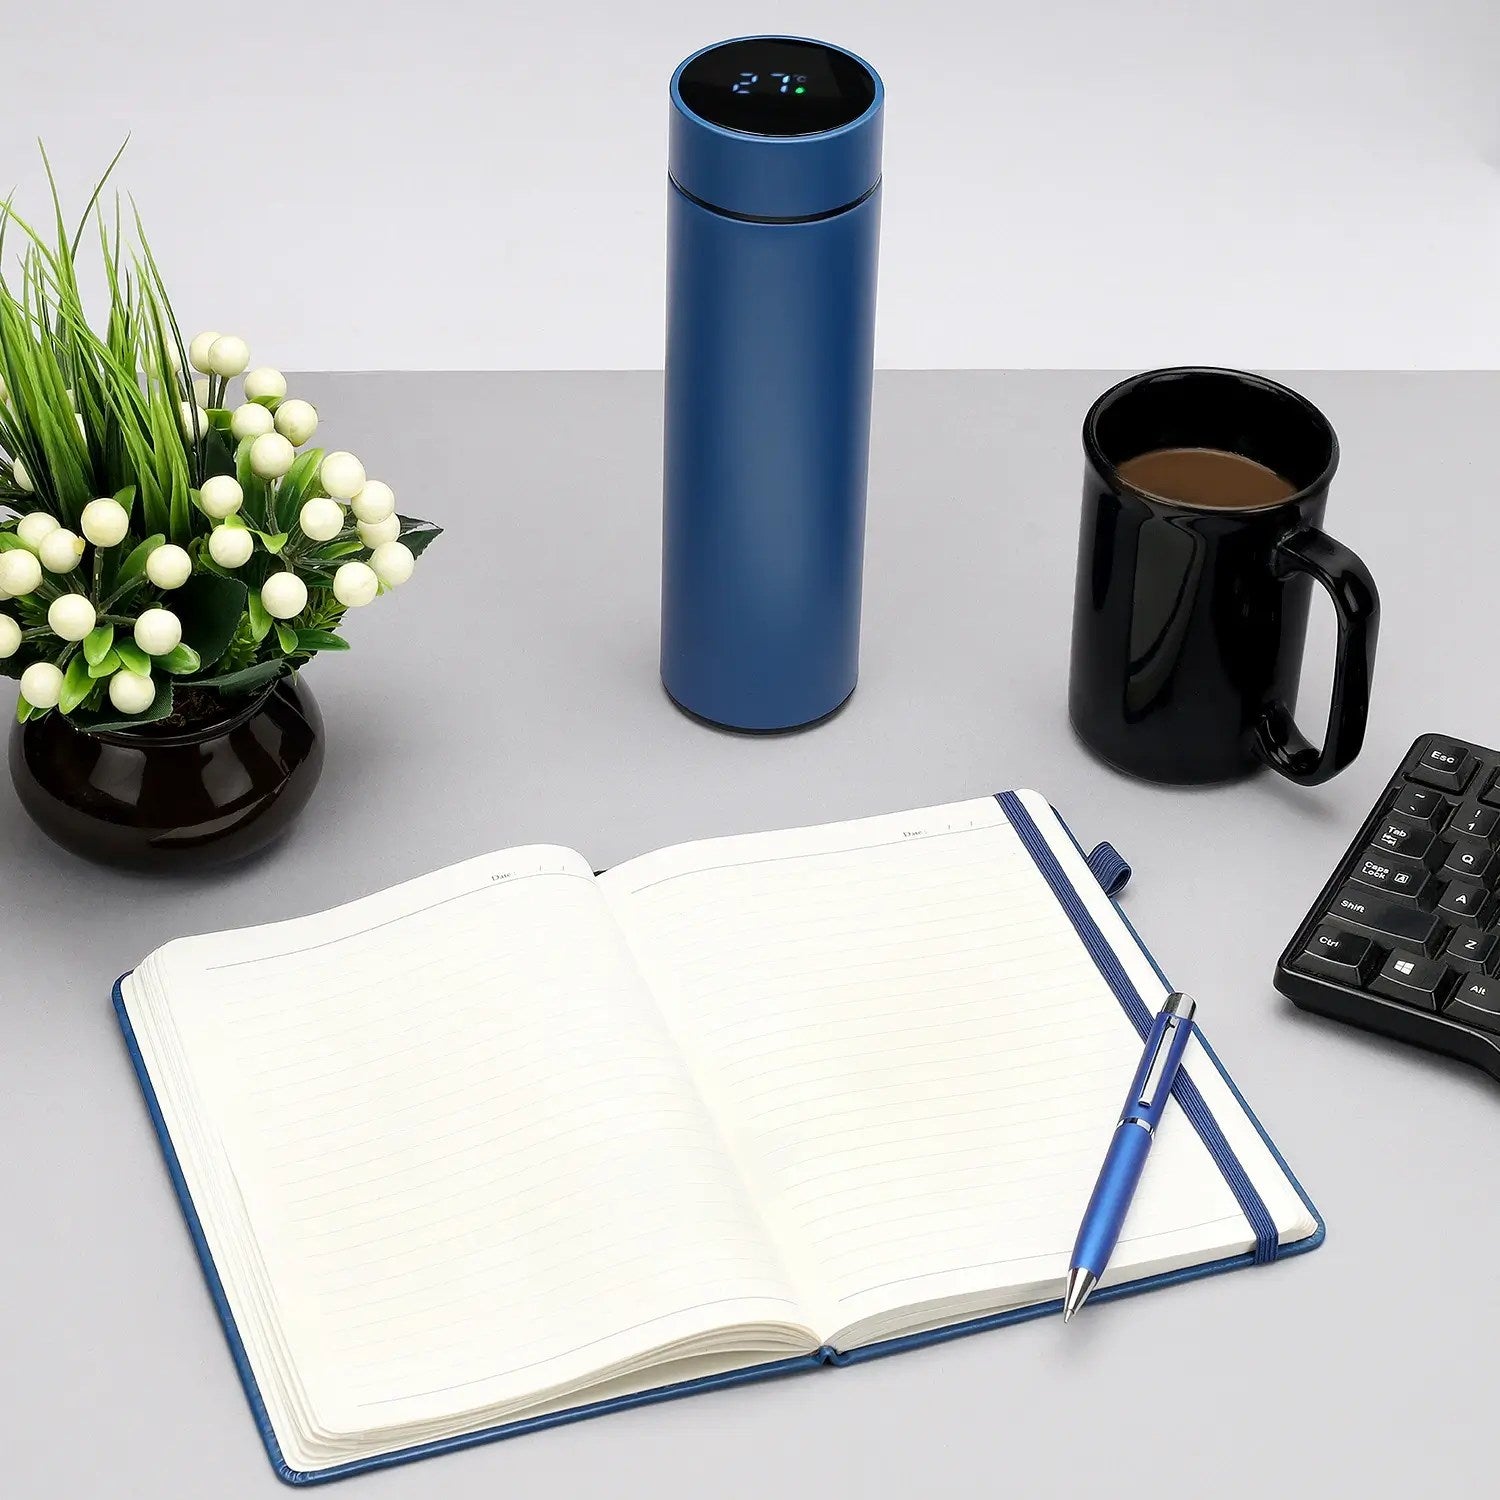 FLAG 4 in 1 Pen With Key chain & Cardholder & Diary Set Classy Matte Blue  finish|Premium Gifting Products For Office|Ideal for Professionals :  Amazon.in: Office Products